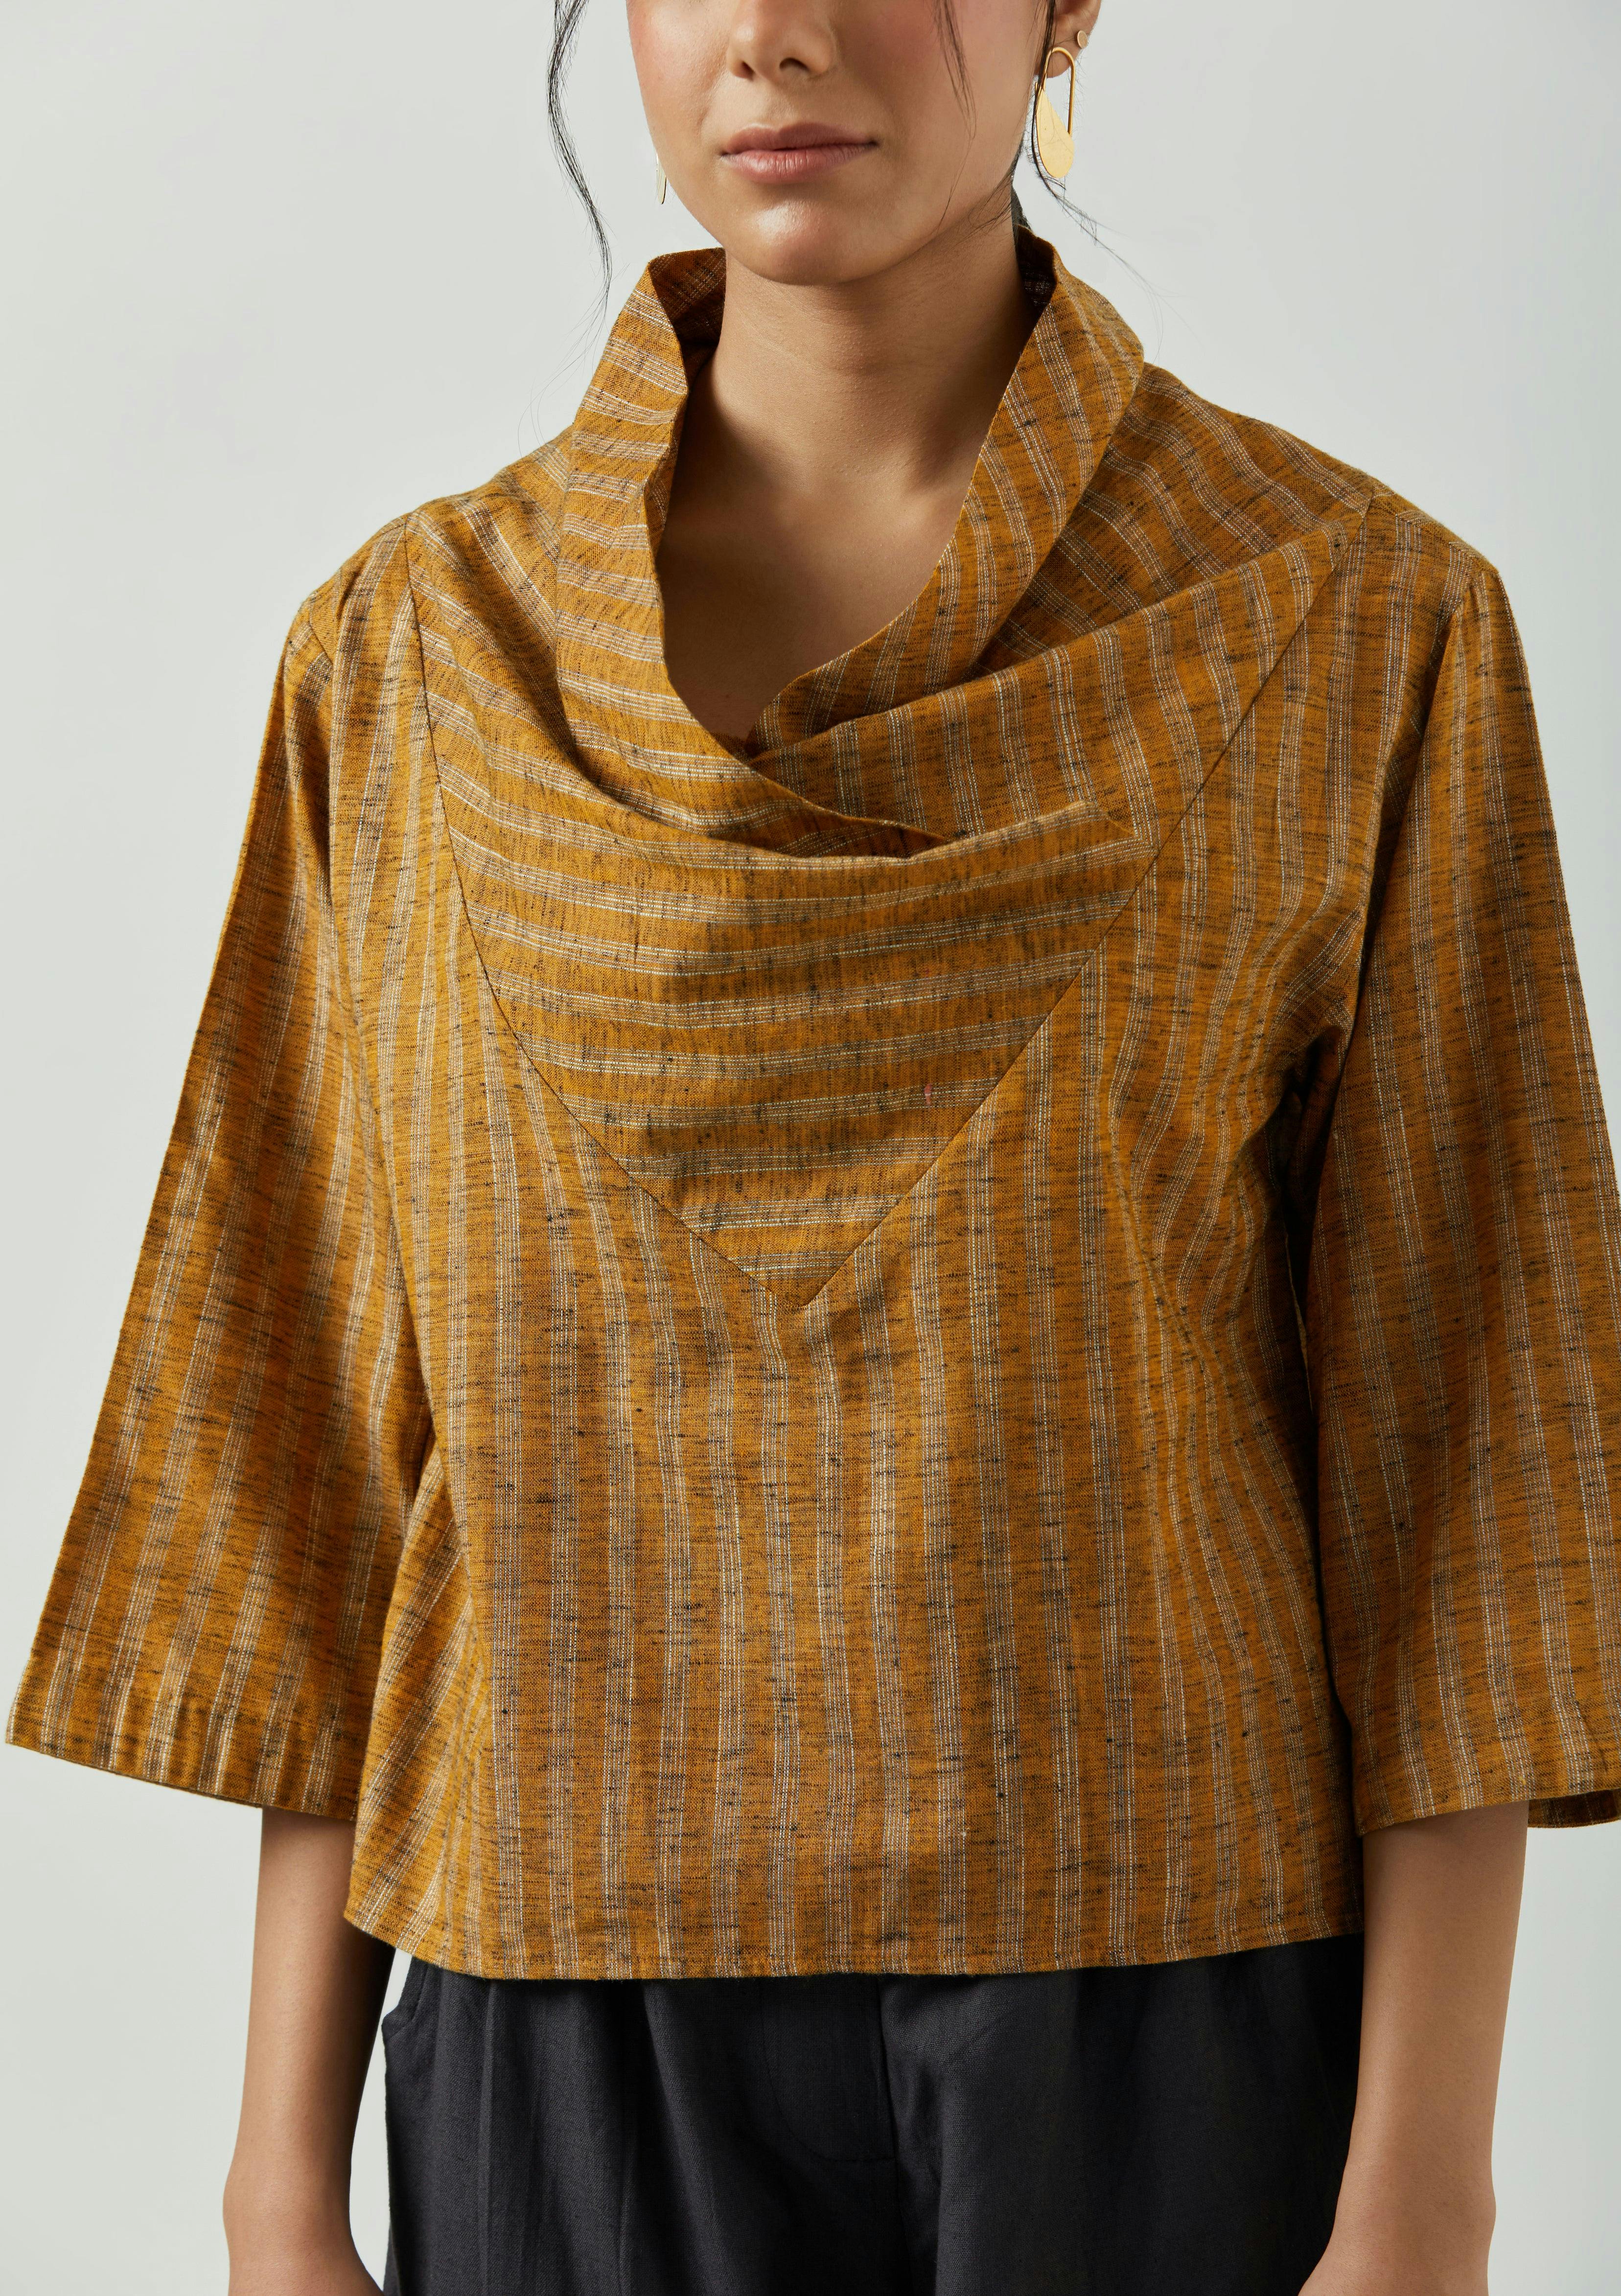 BRIE FOLIO TOP (MUSTARD), a product by MARKKAH STUDIO